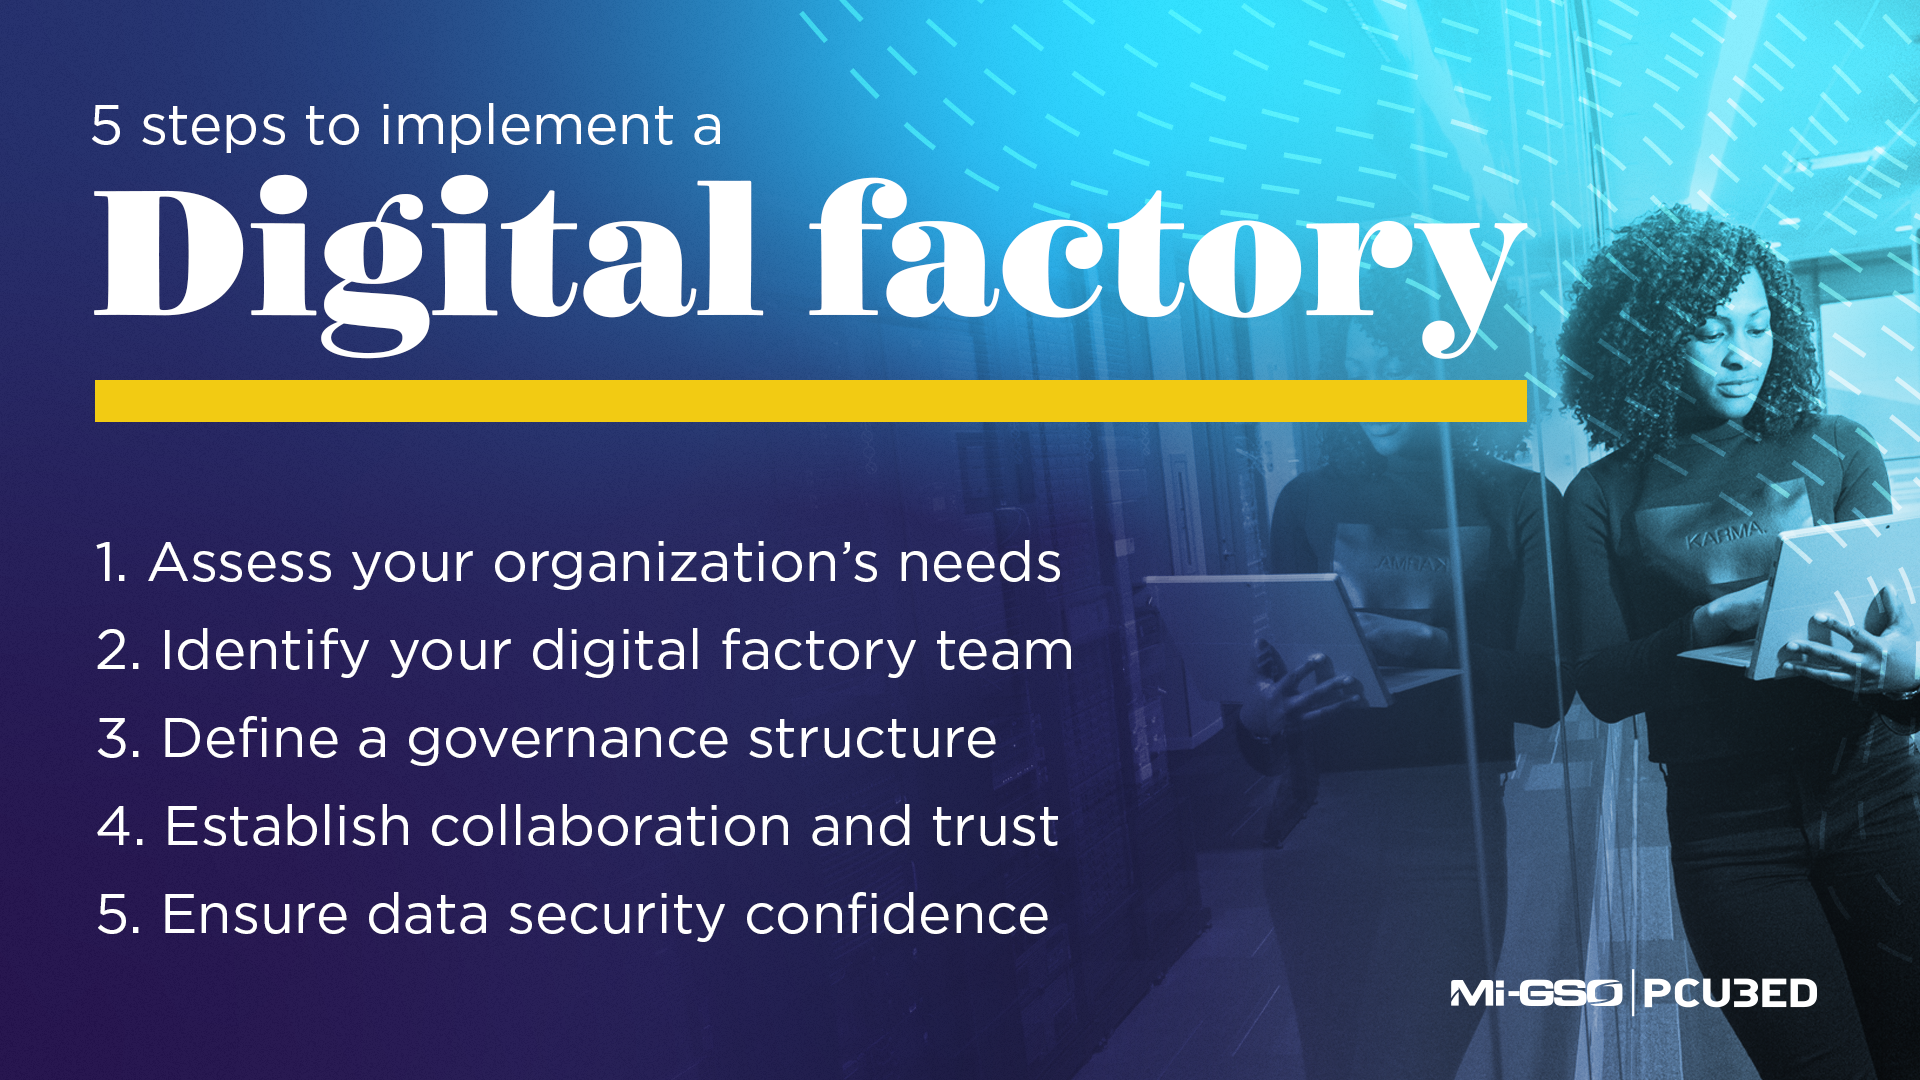 5 steps to implement a digital factory